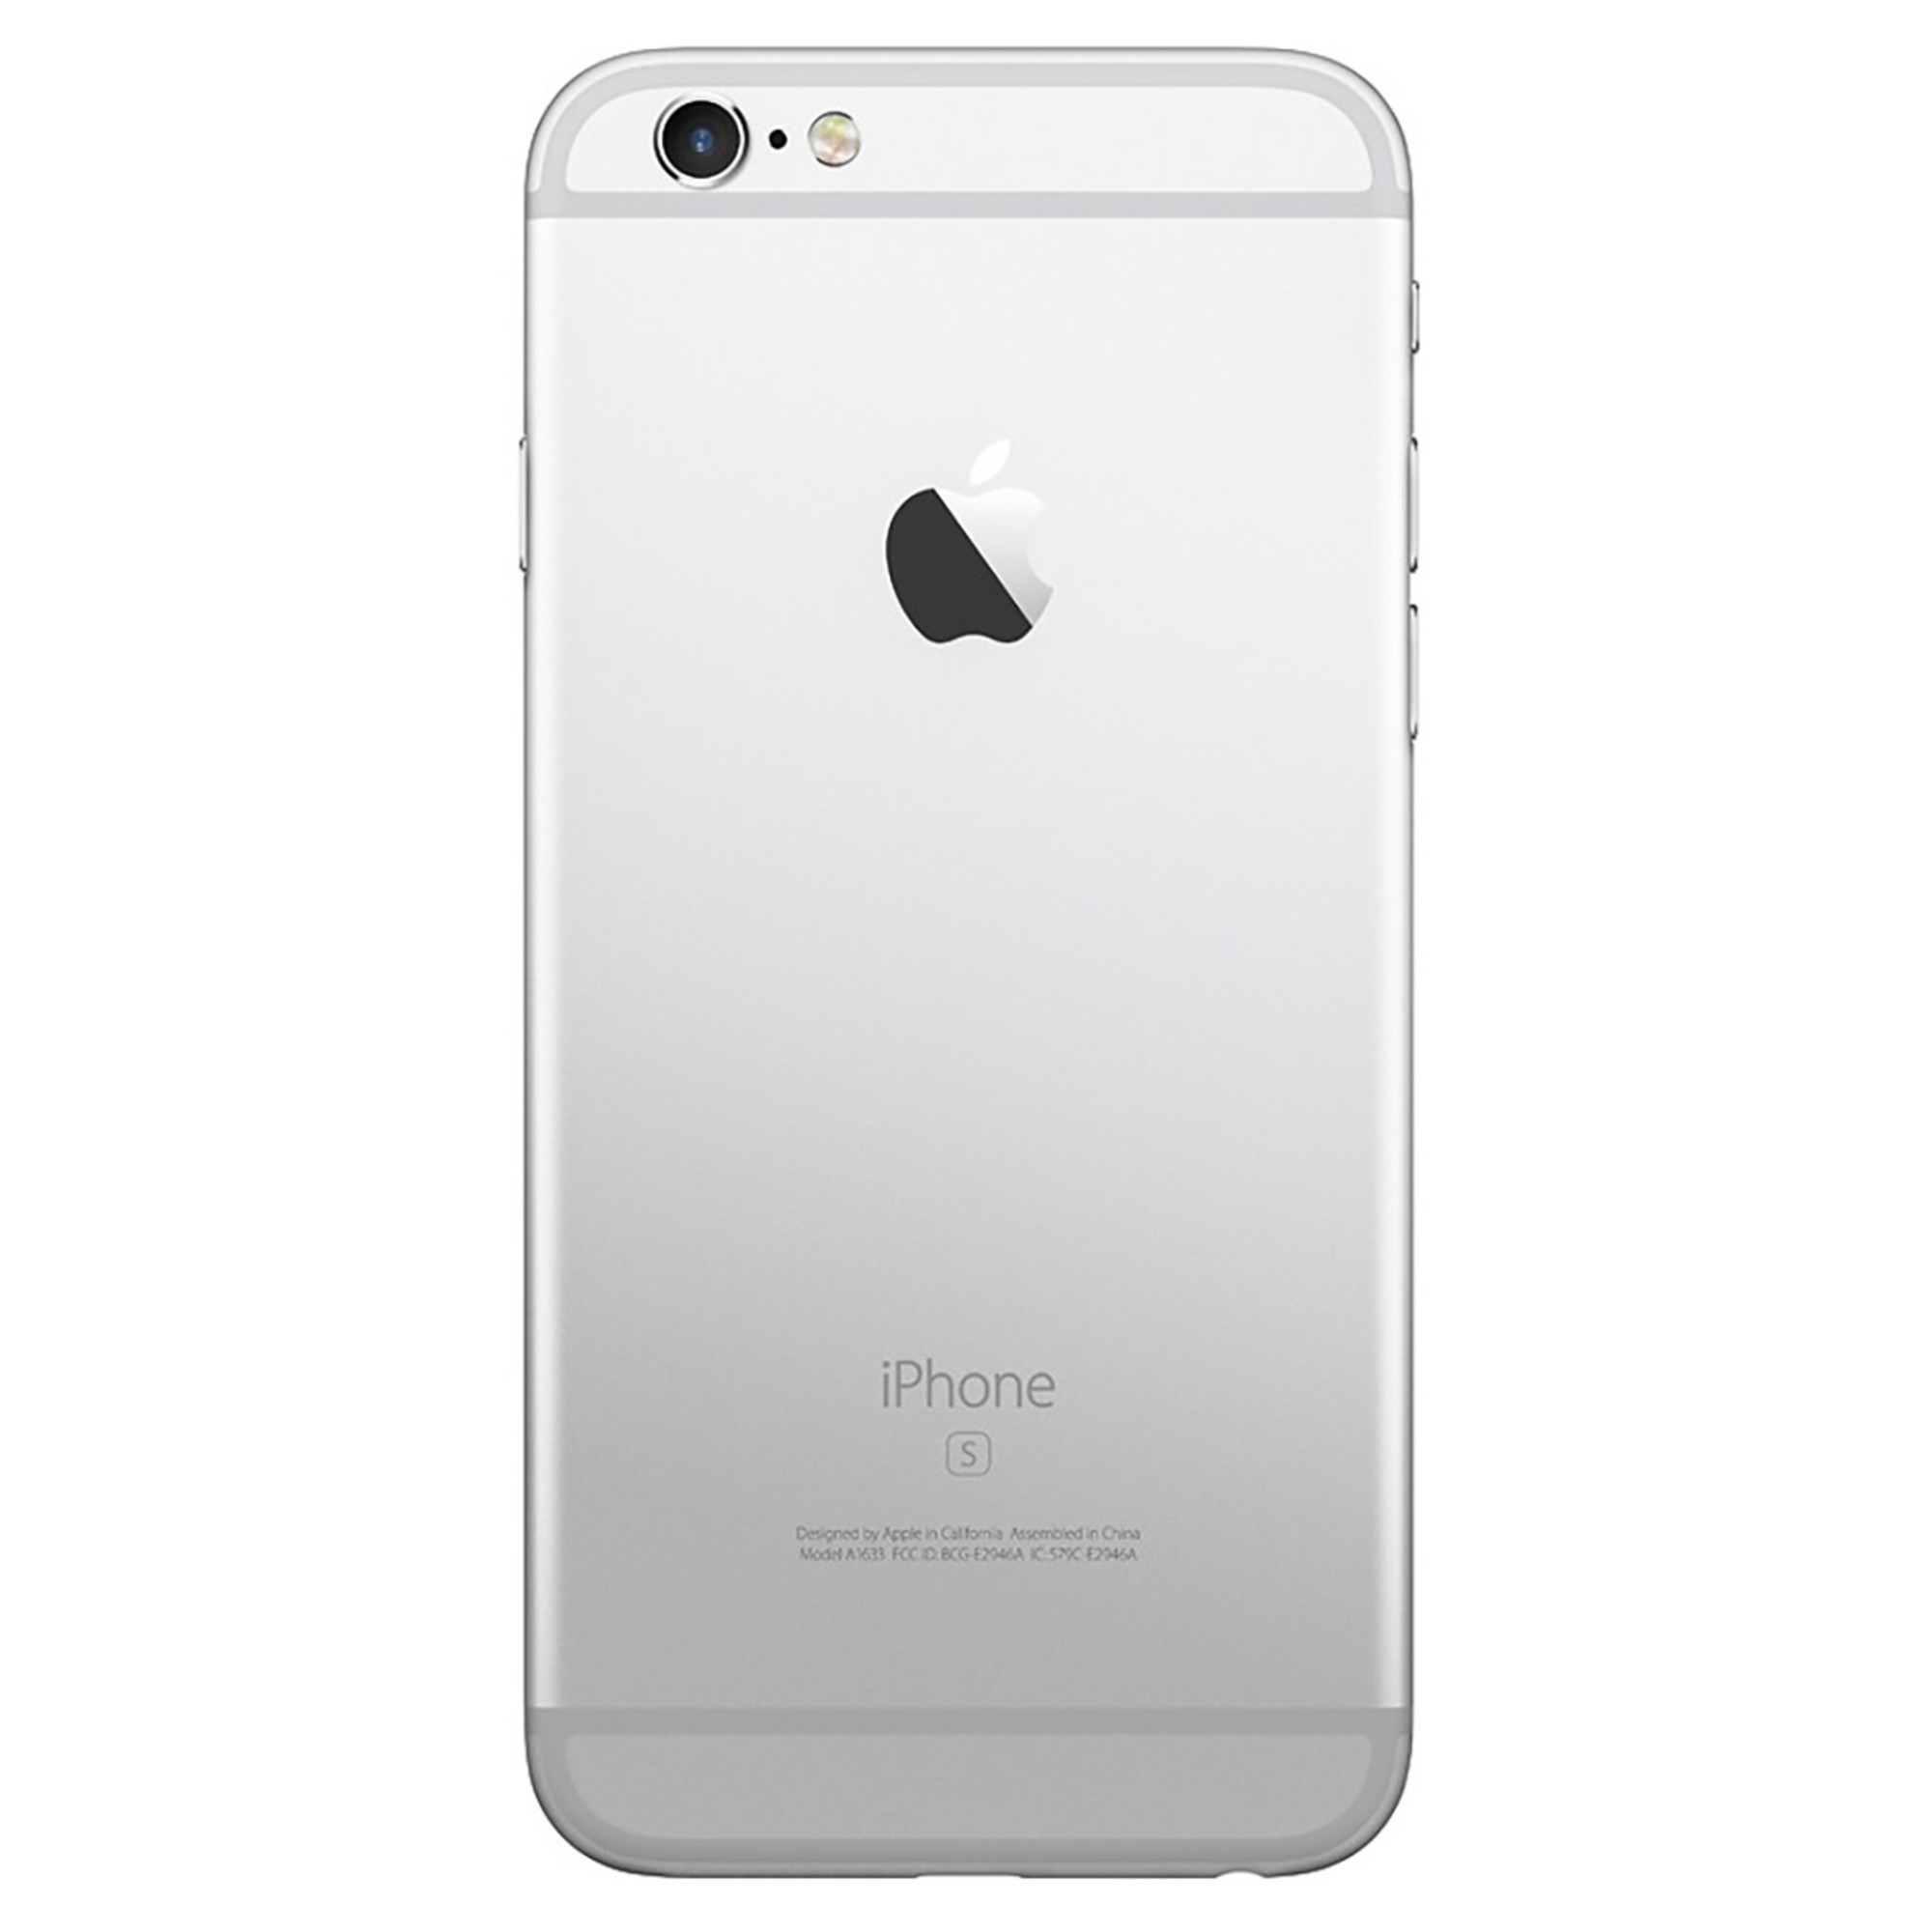 Pre-Owned Apple iPhone 6s 16GB GSM Phone - Silver + WeCare Alcohol Wipes Pack (50 Wipes) - image 3 of 6